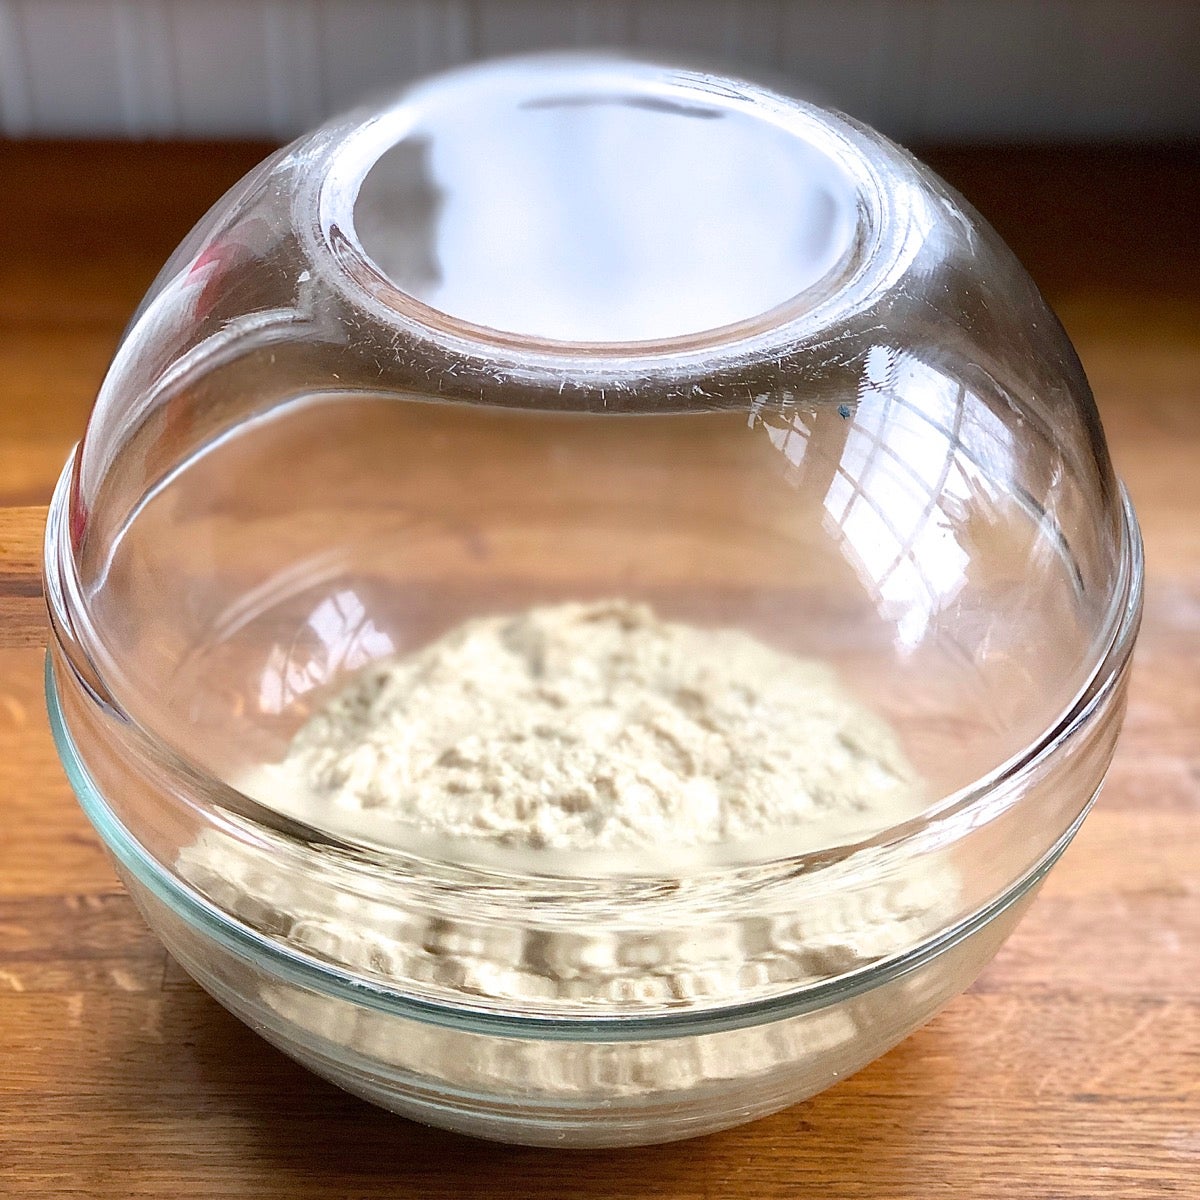 A preferment for Greek Olive and Onion Bread in a glass bowl, ready to rise overnight